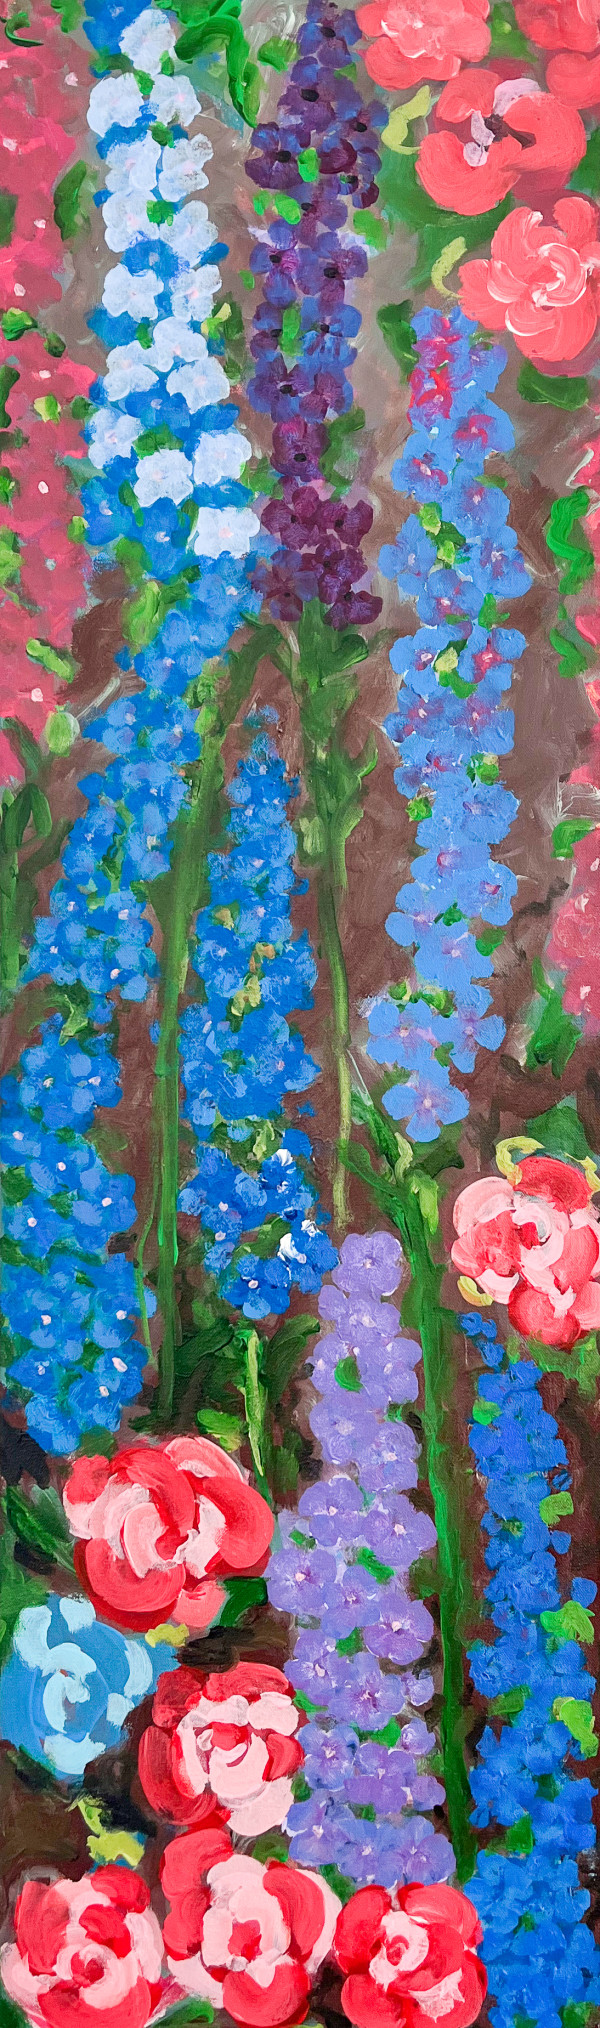 Delphiniums and Pink Roses by Stephanie Fuller